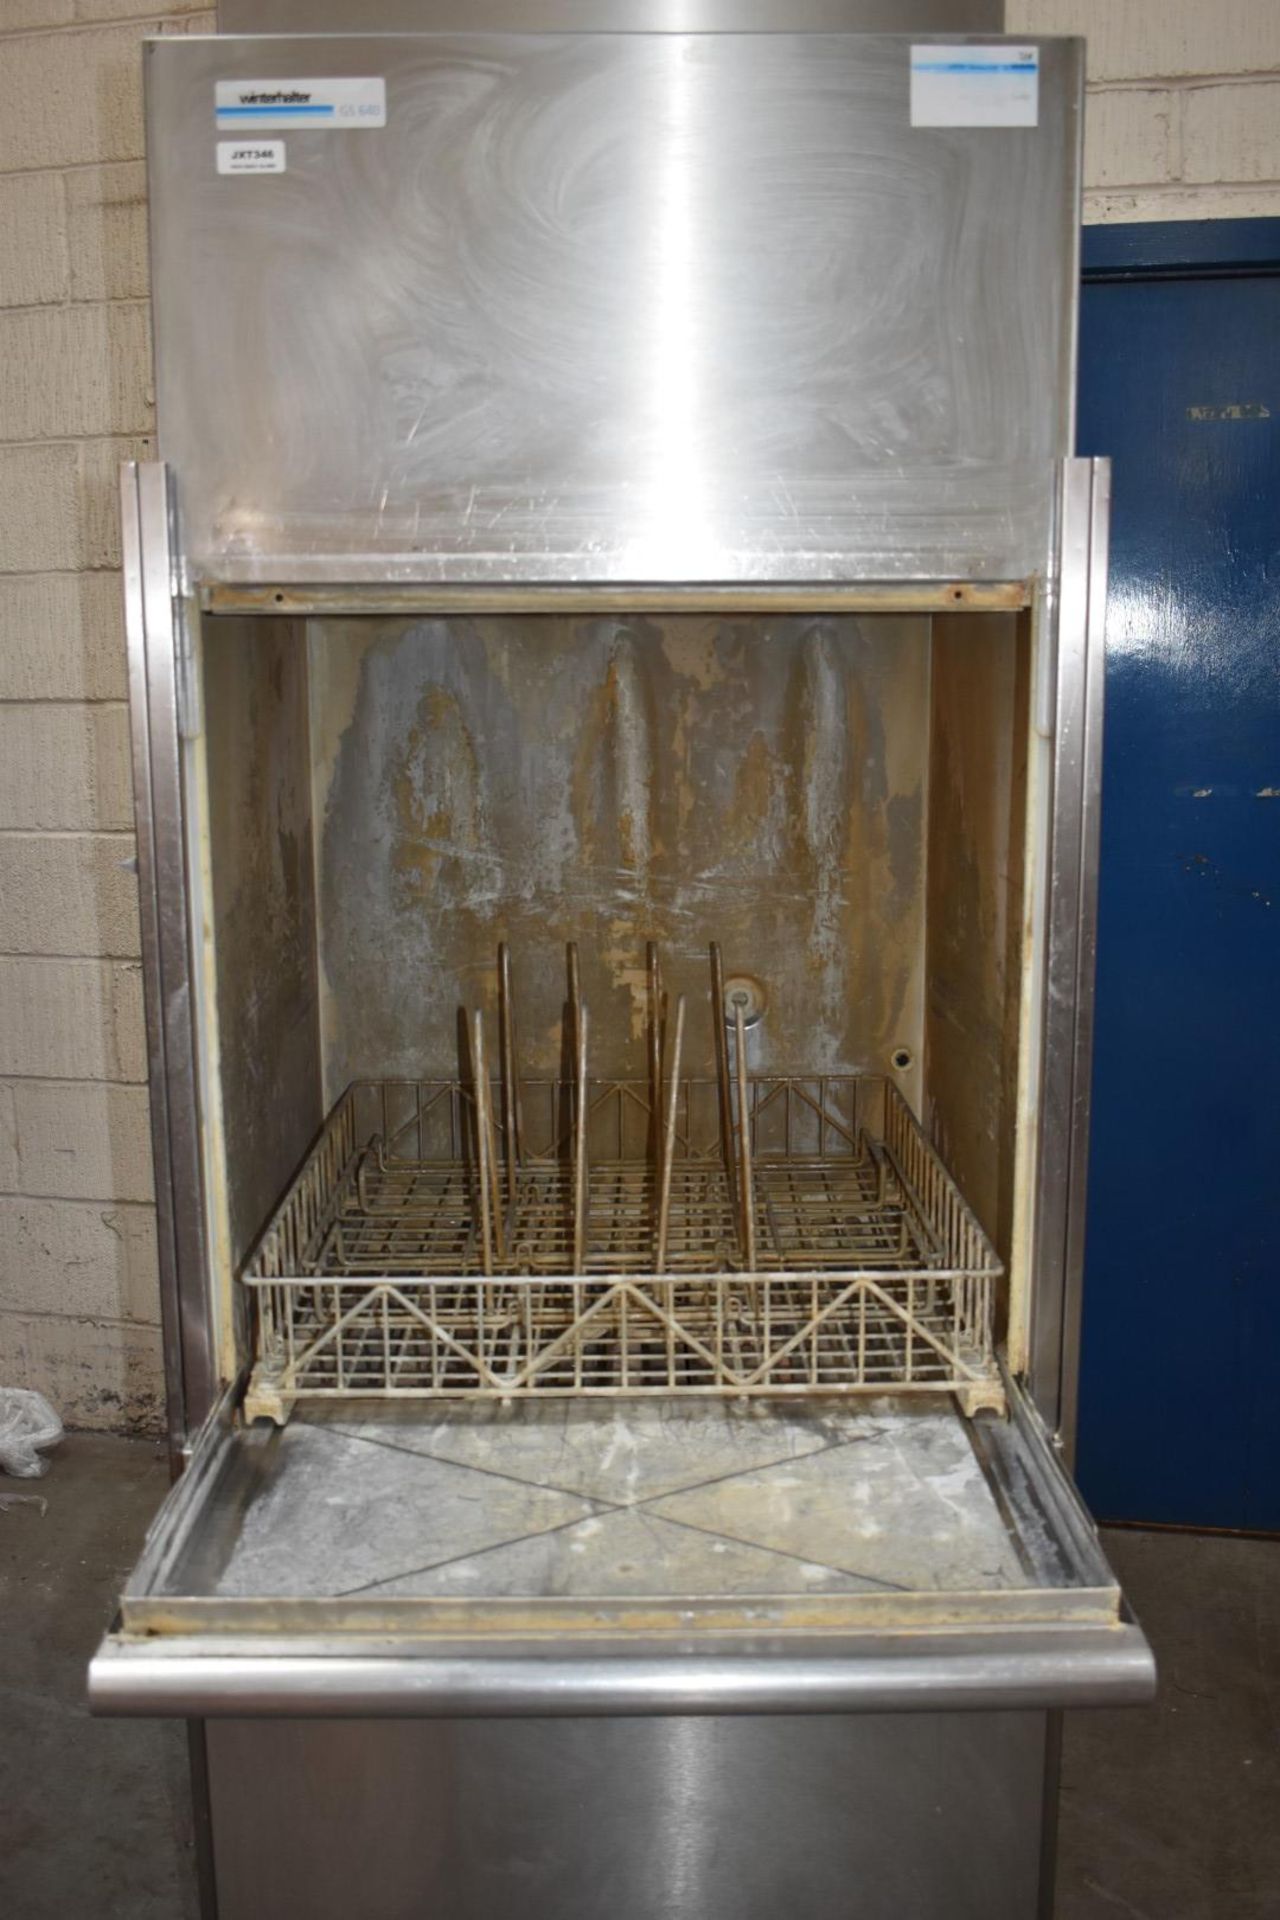 1 x Winterhalter GS640 Utensil Pot Washer - 3 Phase - Original RRP Approx £13,000 - Image 8 of 11